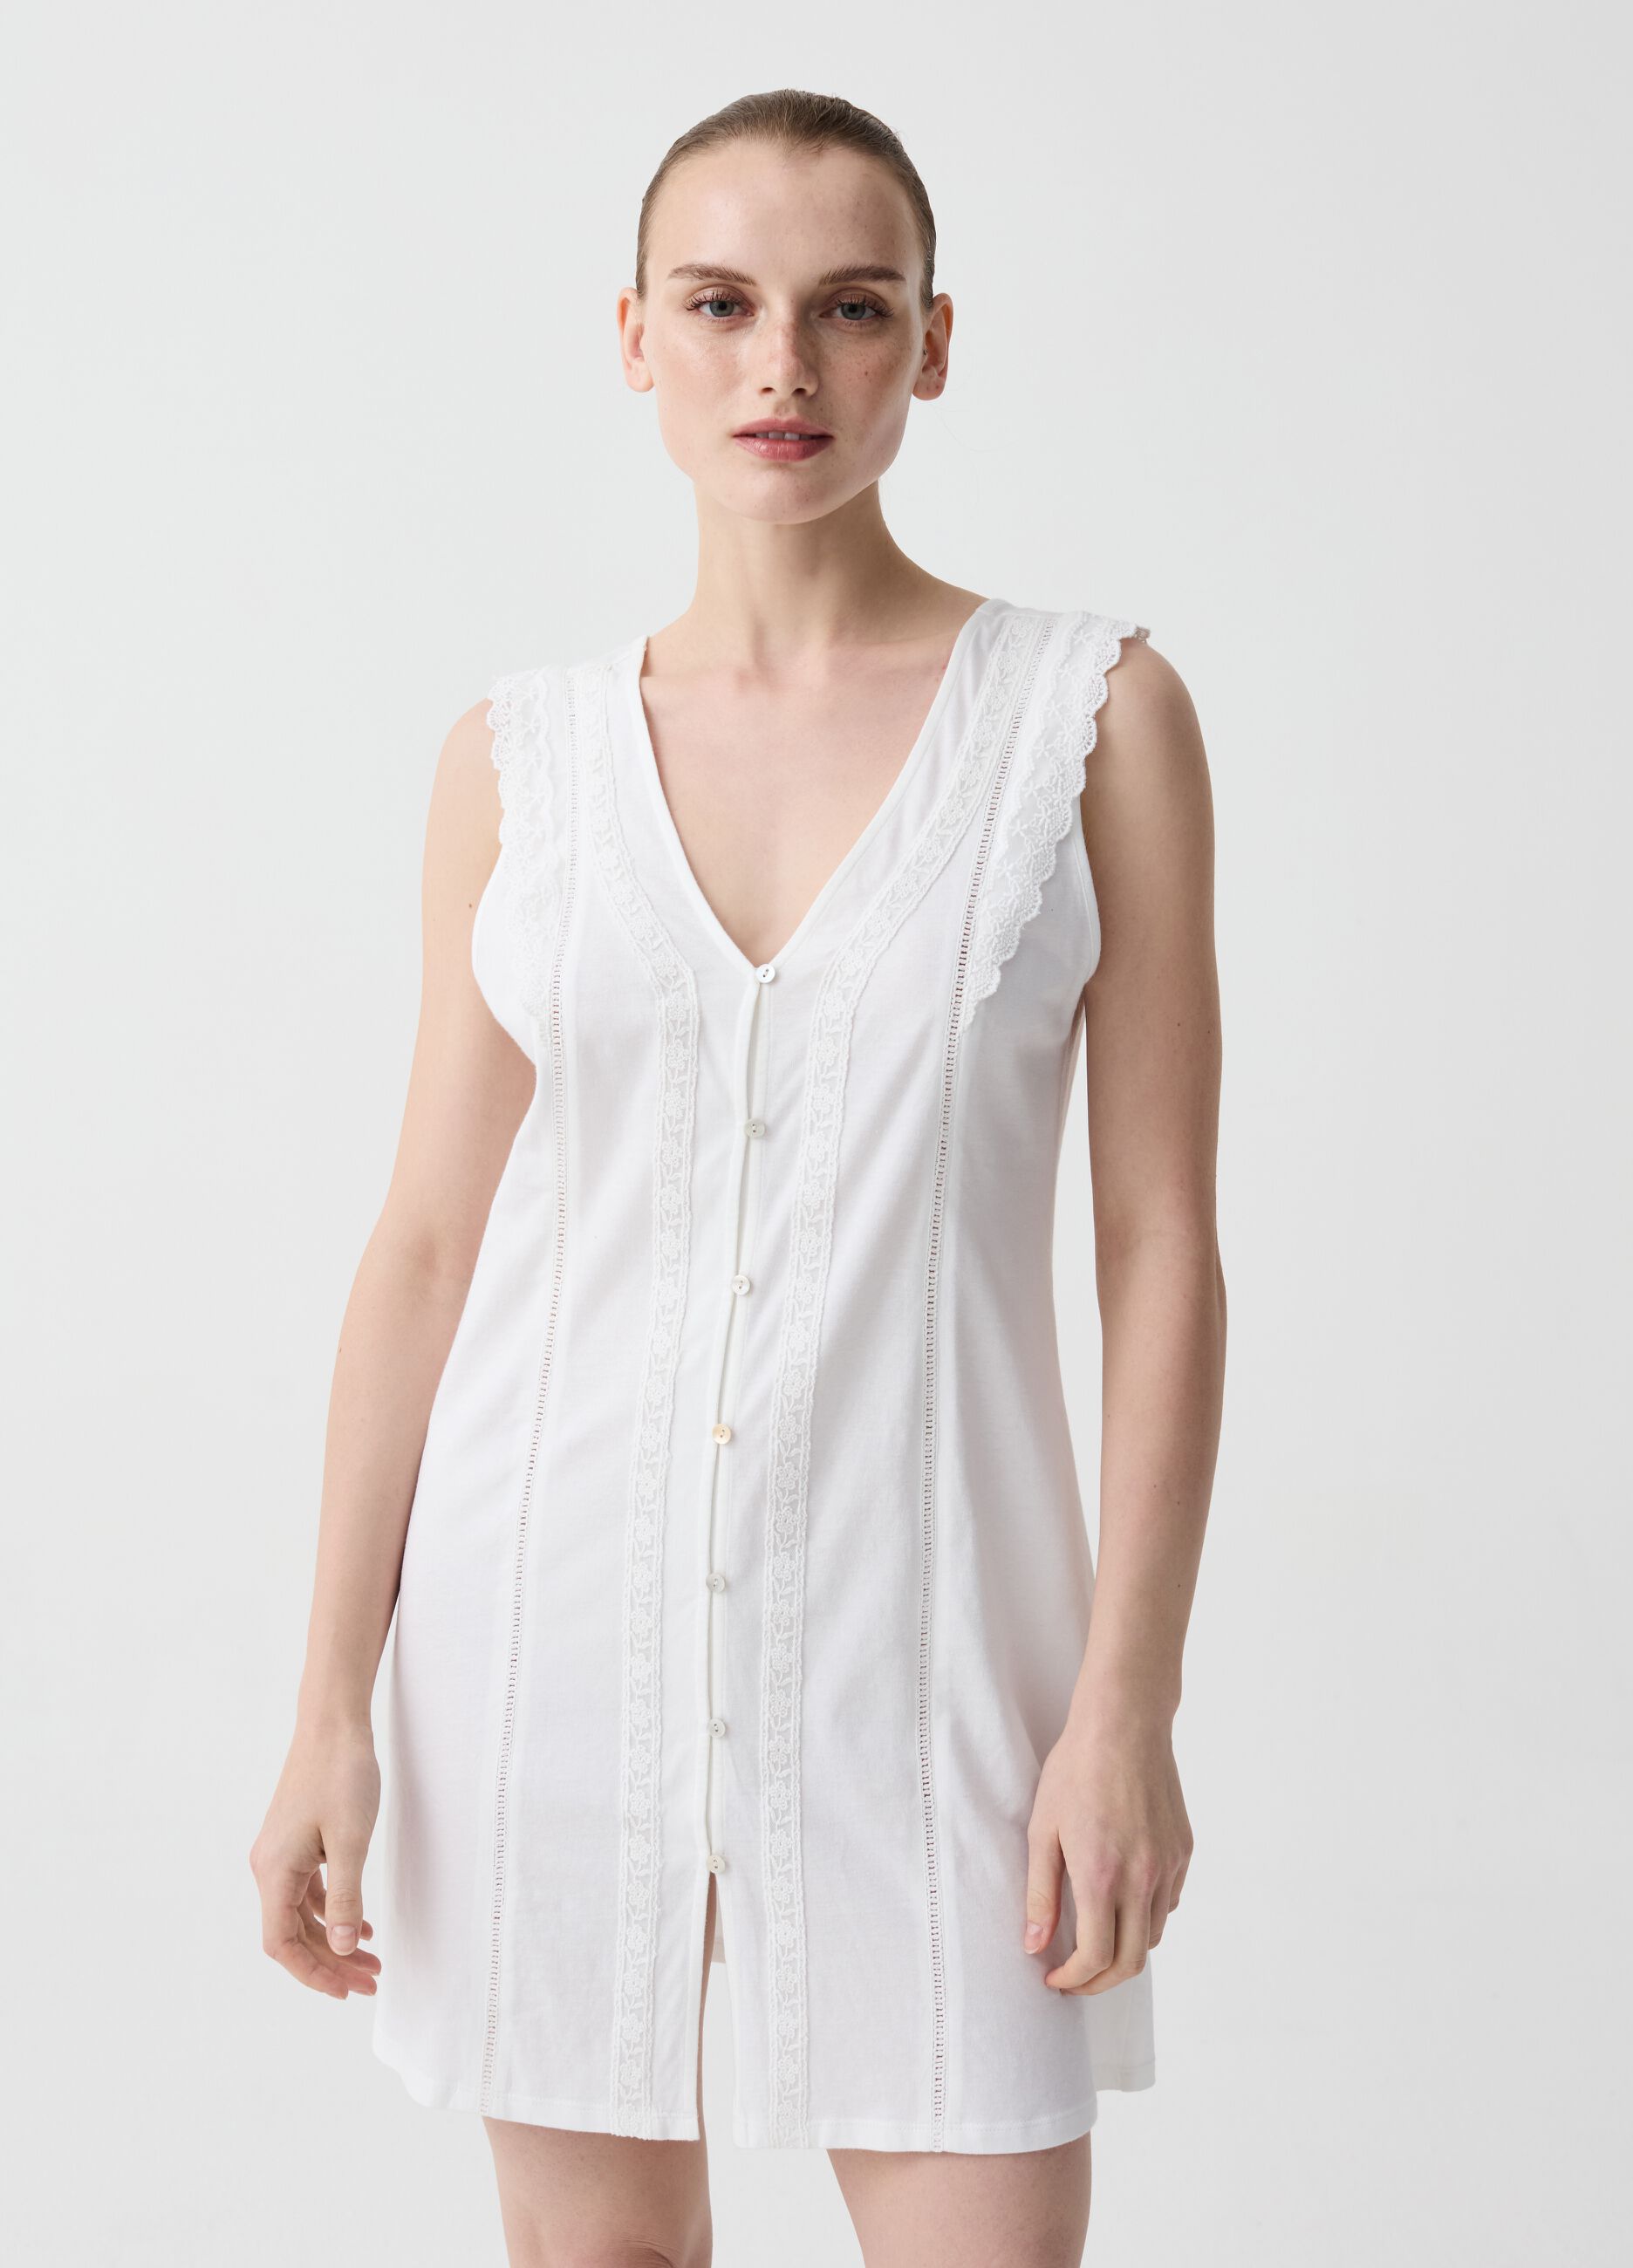 Nightshirt with lace and buttons